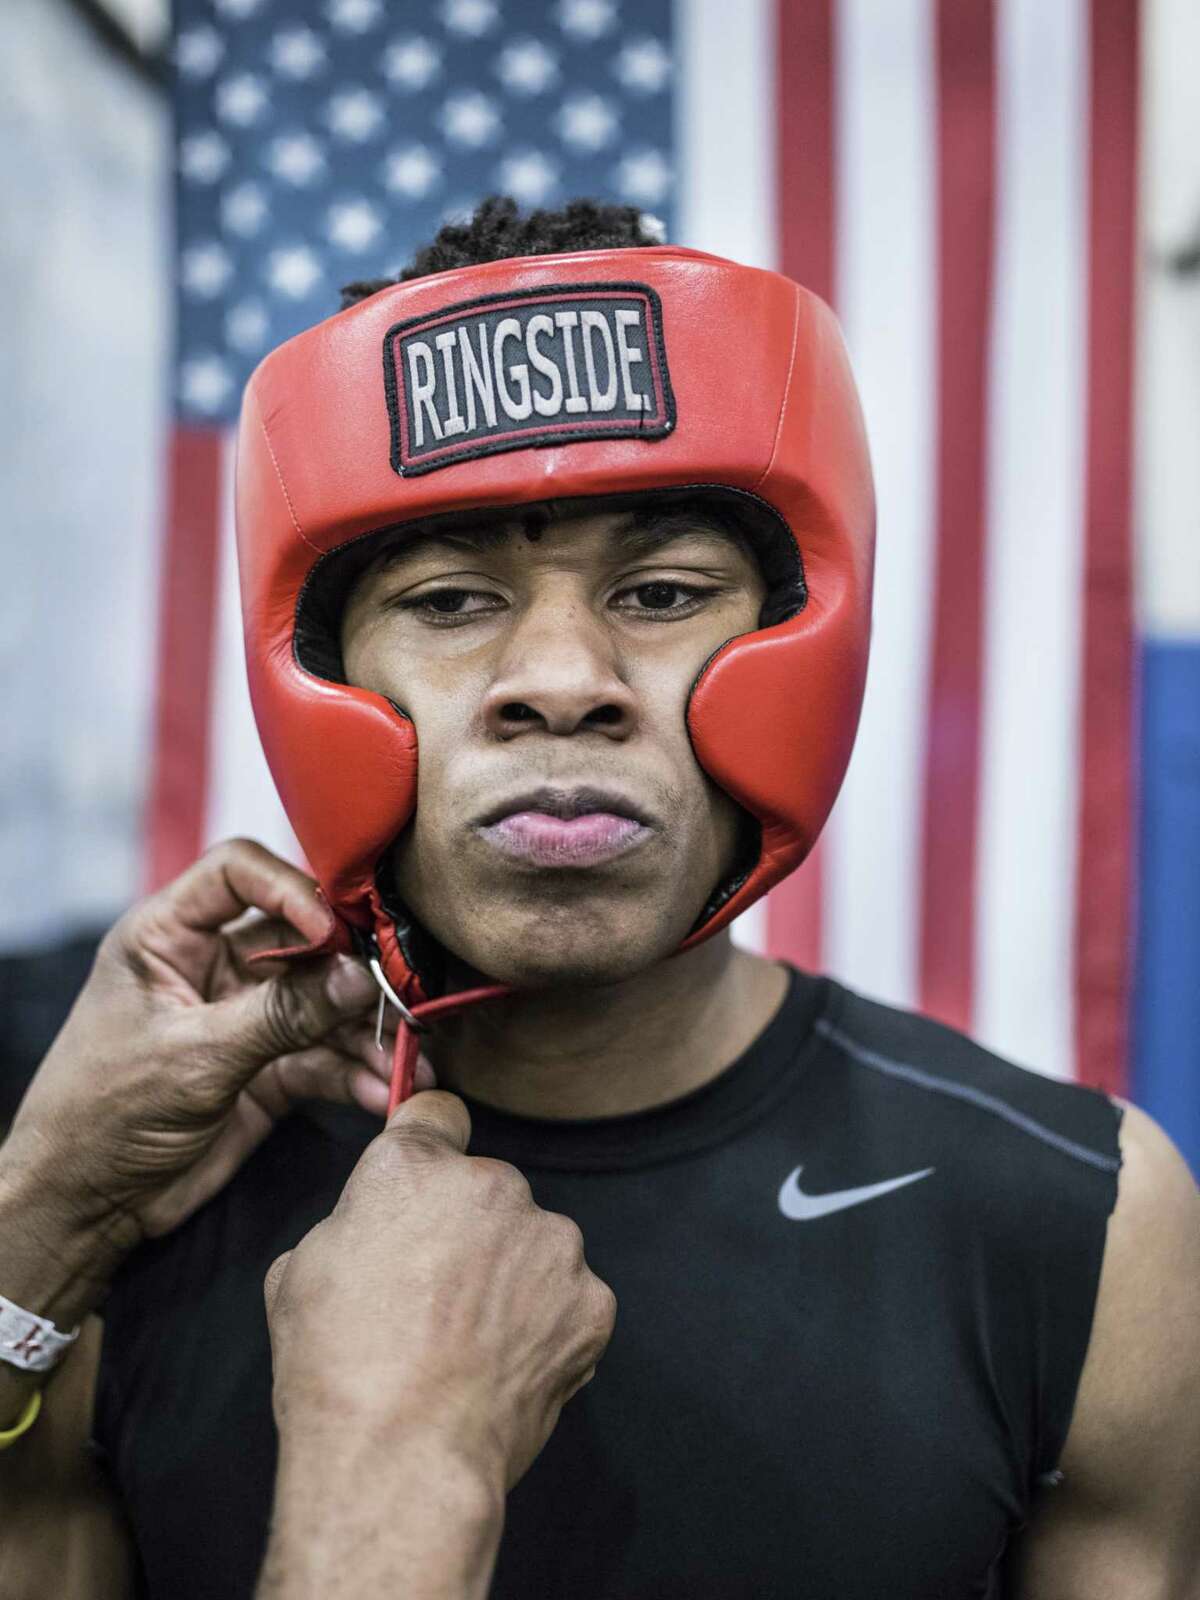 Joseph Barrow Jr., 20, from San Fernando Boxing Club, has his headgear put on before his first fight ever by longtime coach at San Fernando, Willie Hall, during a boxing event at the Lincoln Community Center in San Antonio, Texas on Saturday, March 4, 2017.